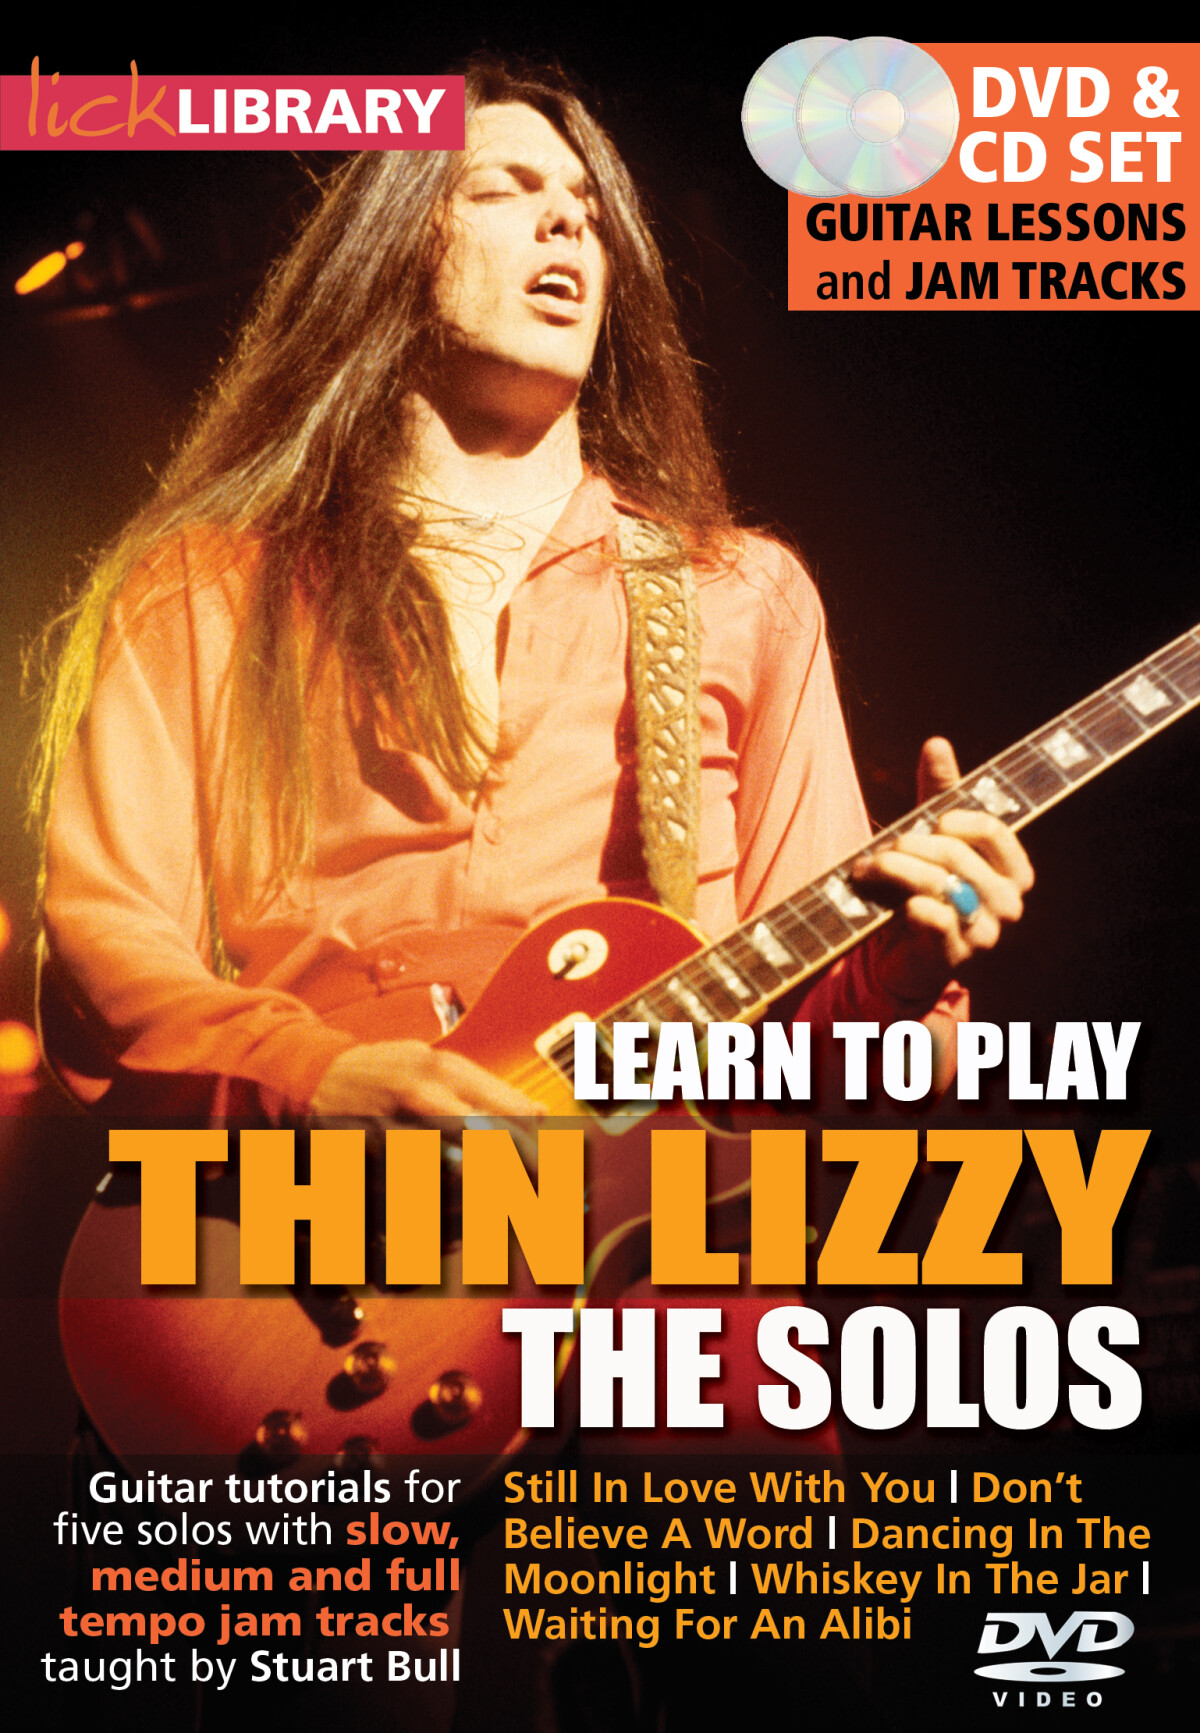 Lick Library Learn To Play Thin Lizzy - The Solos